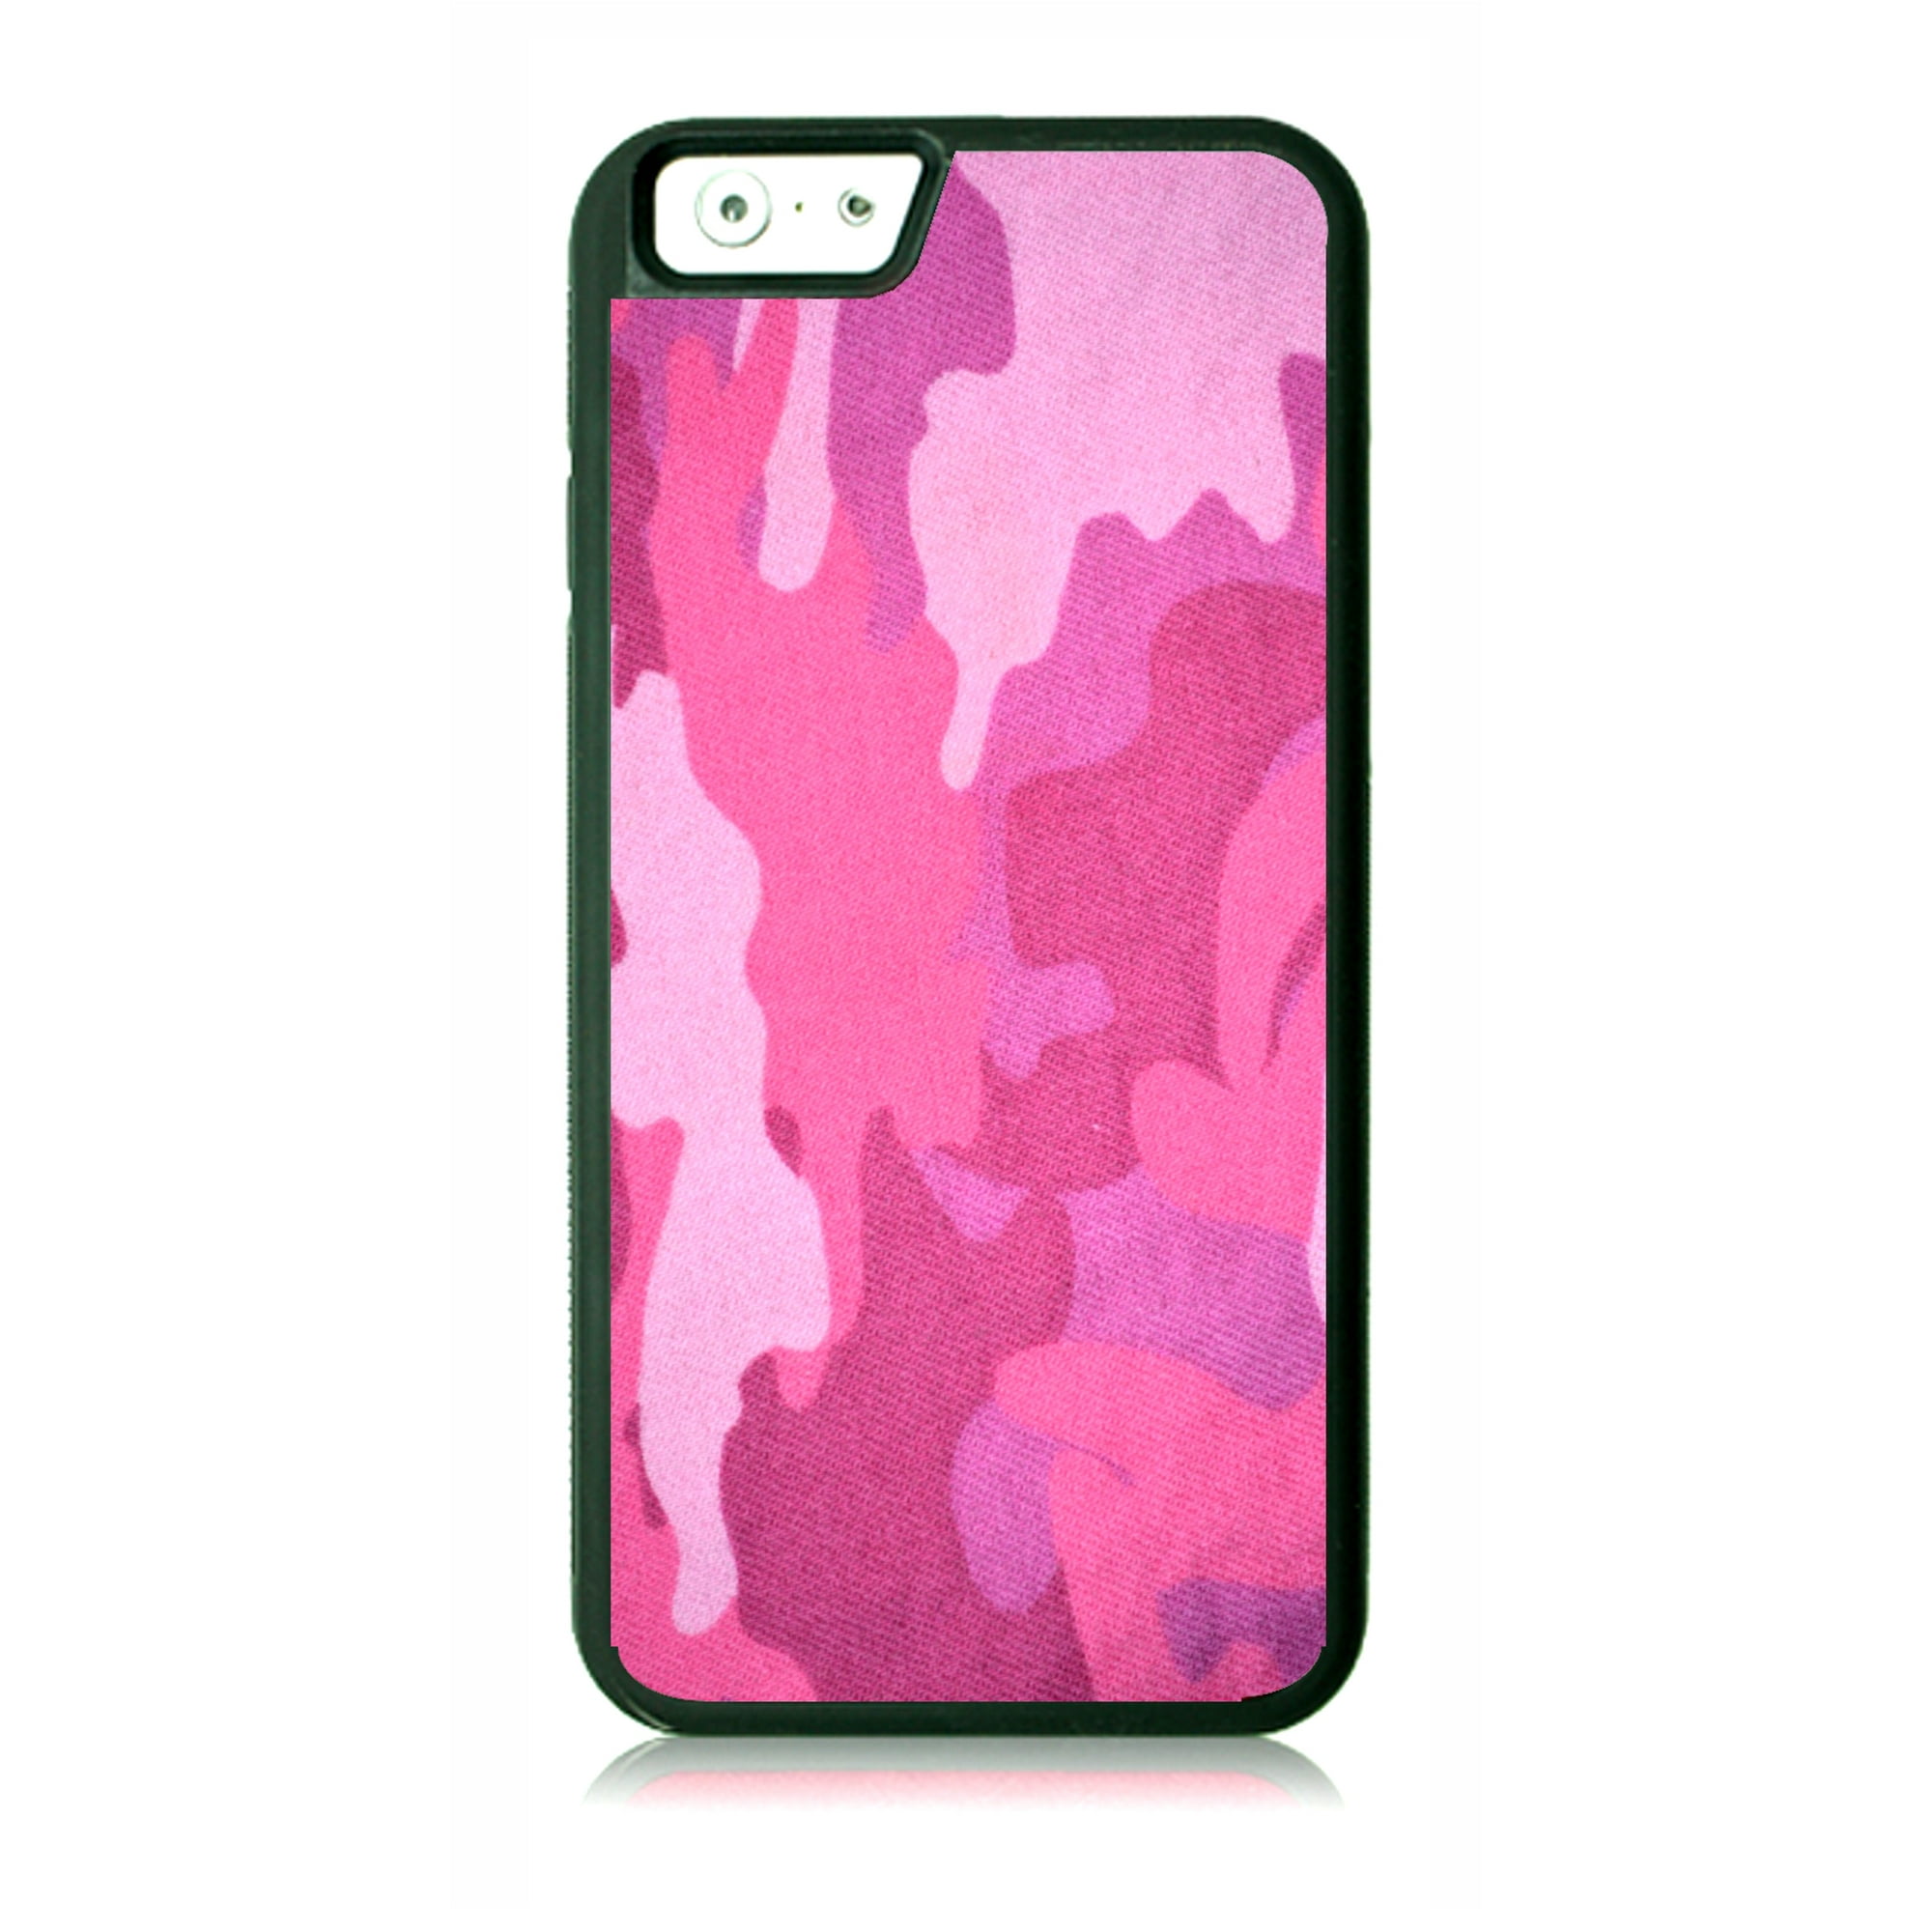 Fugtighed Deltage peddling Pink Camo Camouflage Black Rubber Case for the Apple iPhone 6 / iPhone 6s - iPhone  6 Accessories - iPhone 6s Accessories - Walmart.com